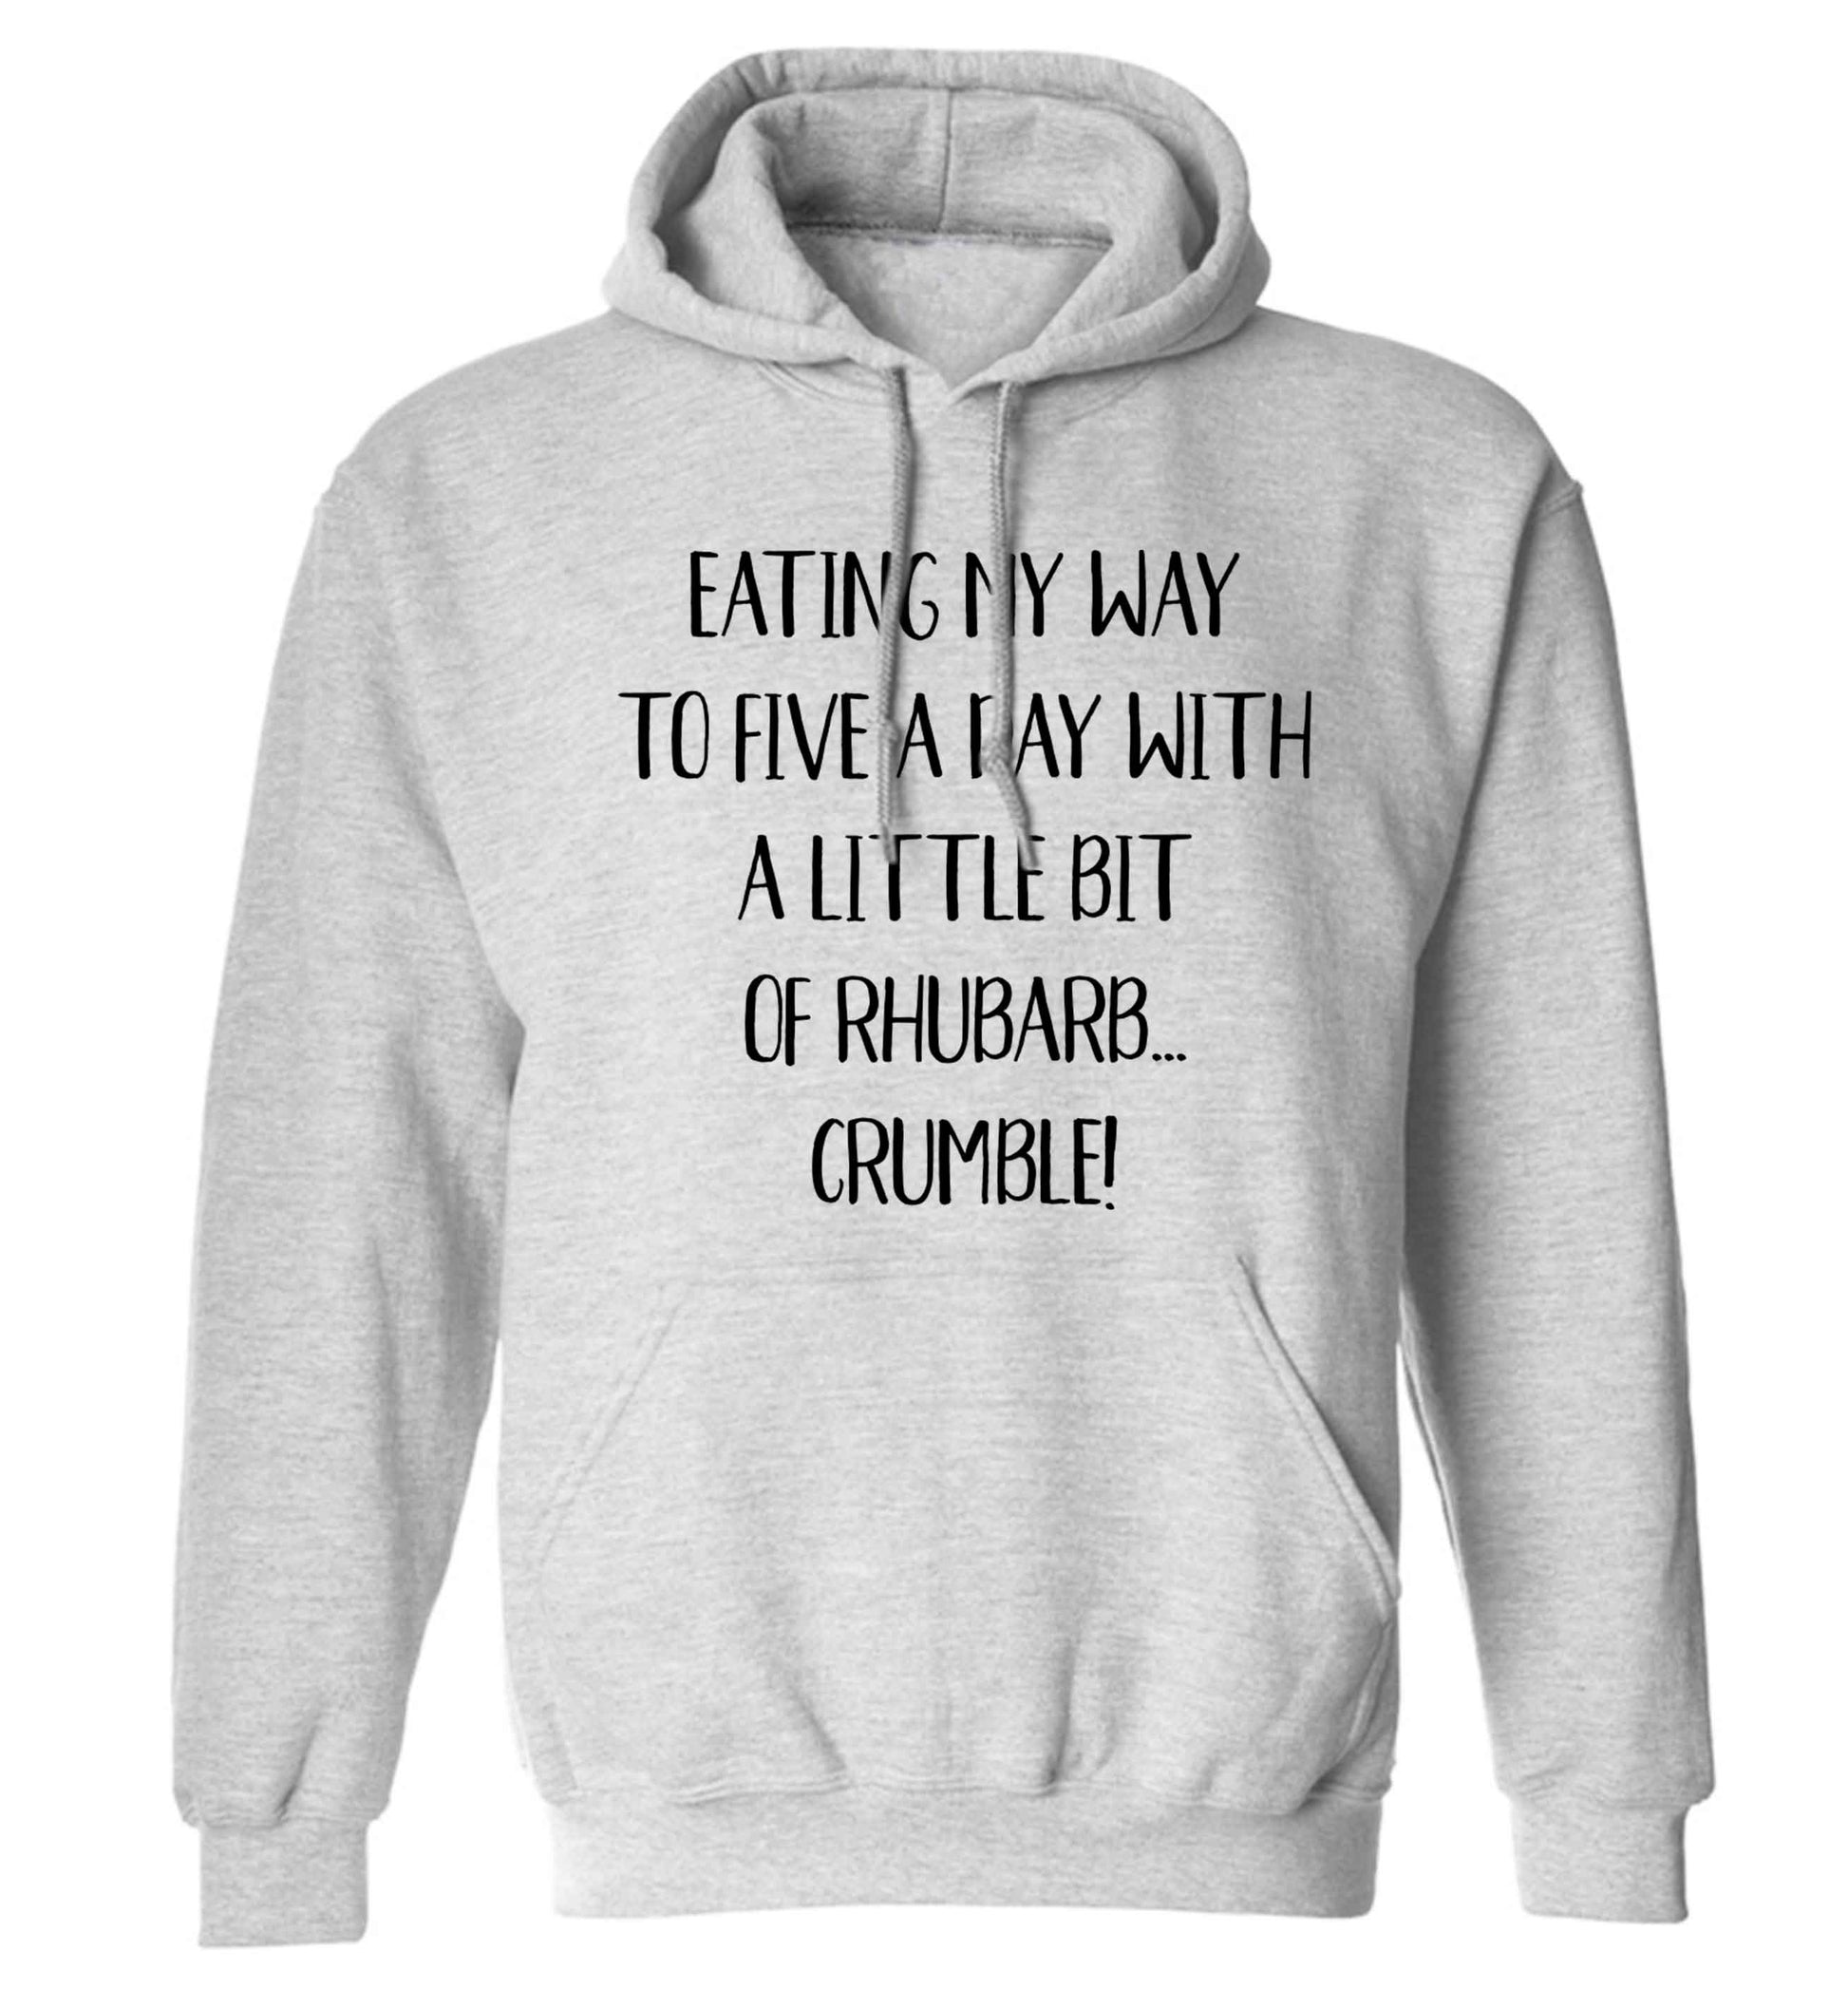 Eating my way to five a day with a little bit of rhubarb crumble adults unisex grey hoodie 2XL